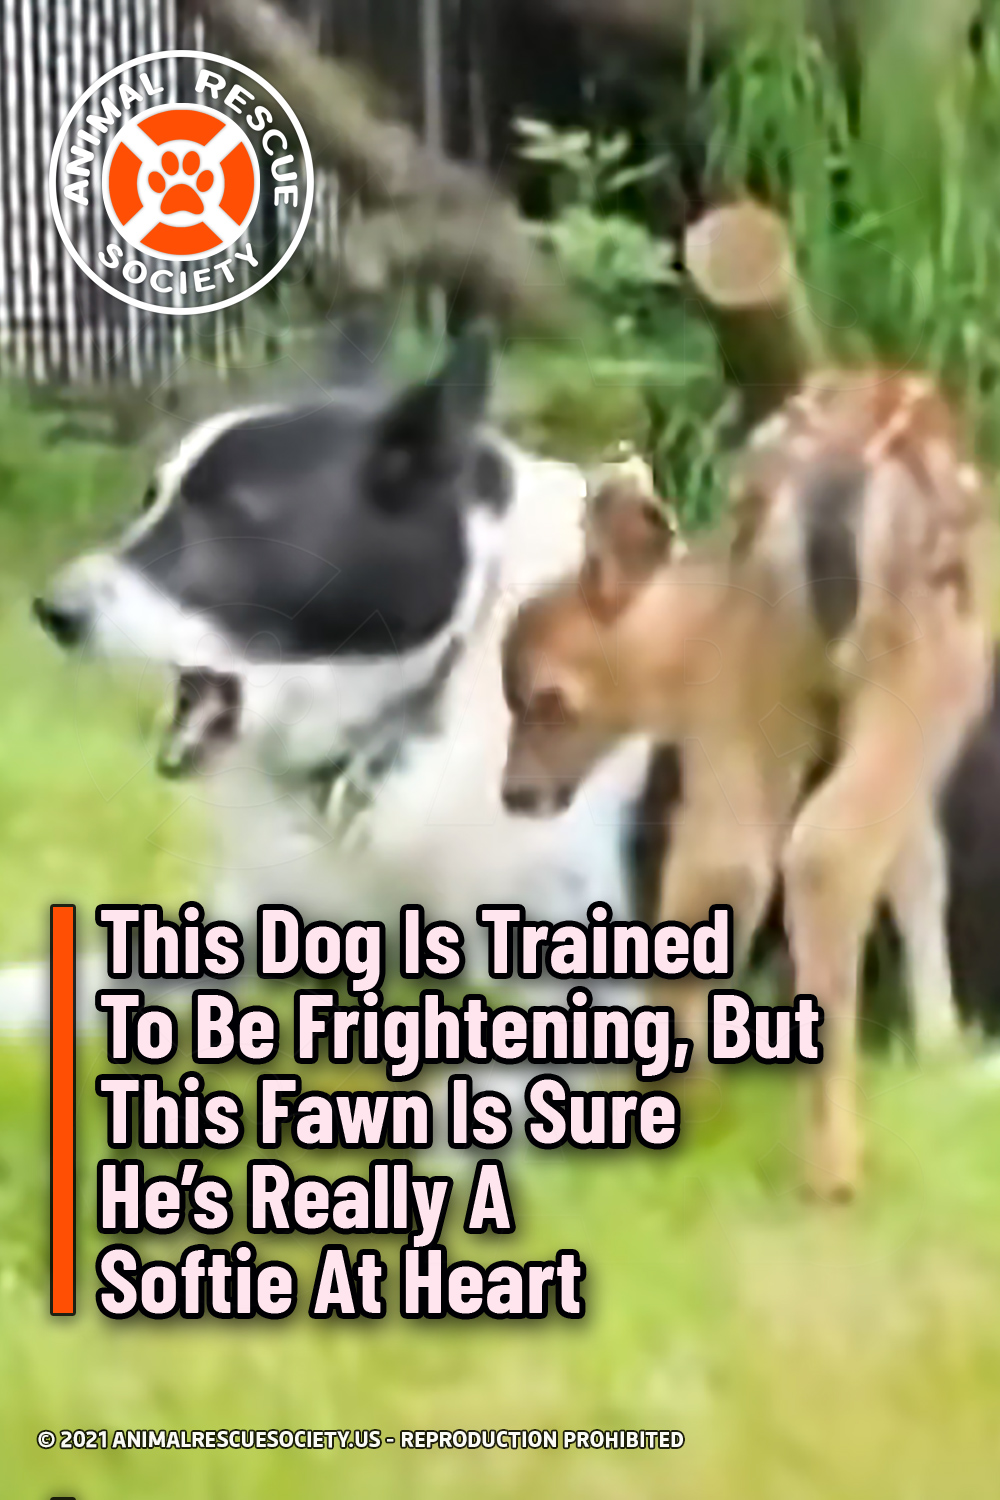 This Dog Is Trained To Be Frightening, But This Fawn Is Sure He’s Really A Softie At Heart